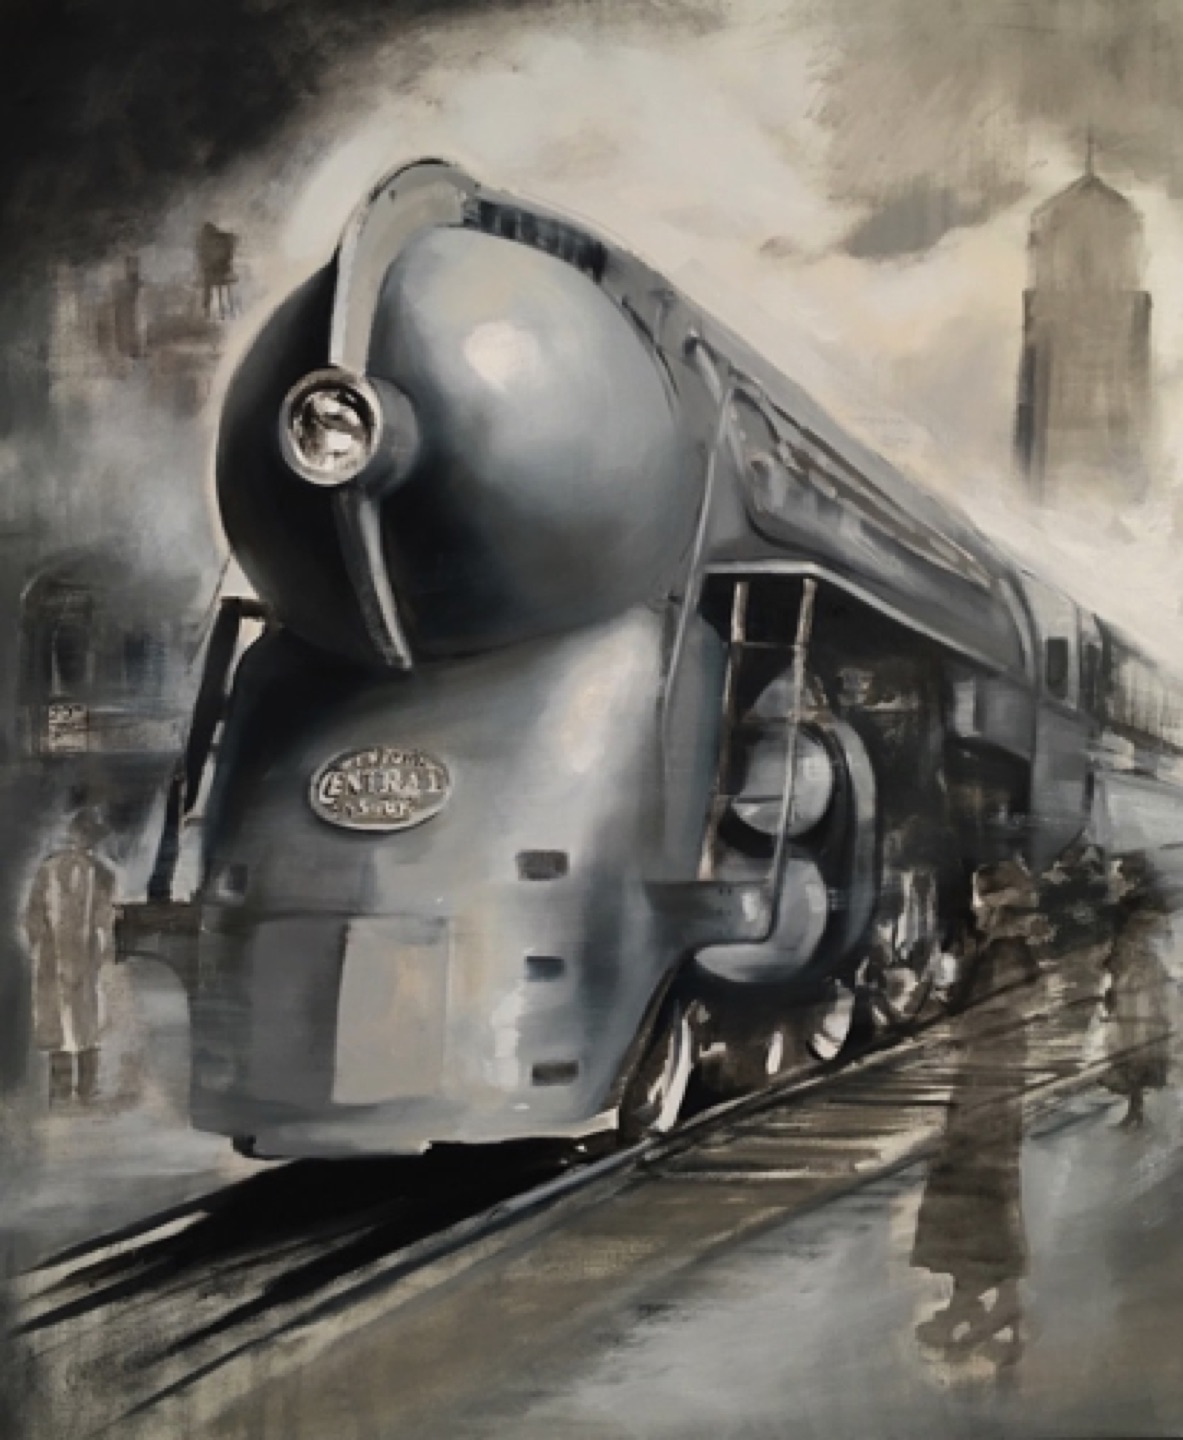 Gregg Chadwick
Mystery Train (20th Century Limited)
60”x50” oil on linen 2016
Pepi Kelman & Coles Brewer Collection, Pacific Palisades, California
Sold September 2021